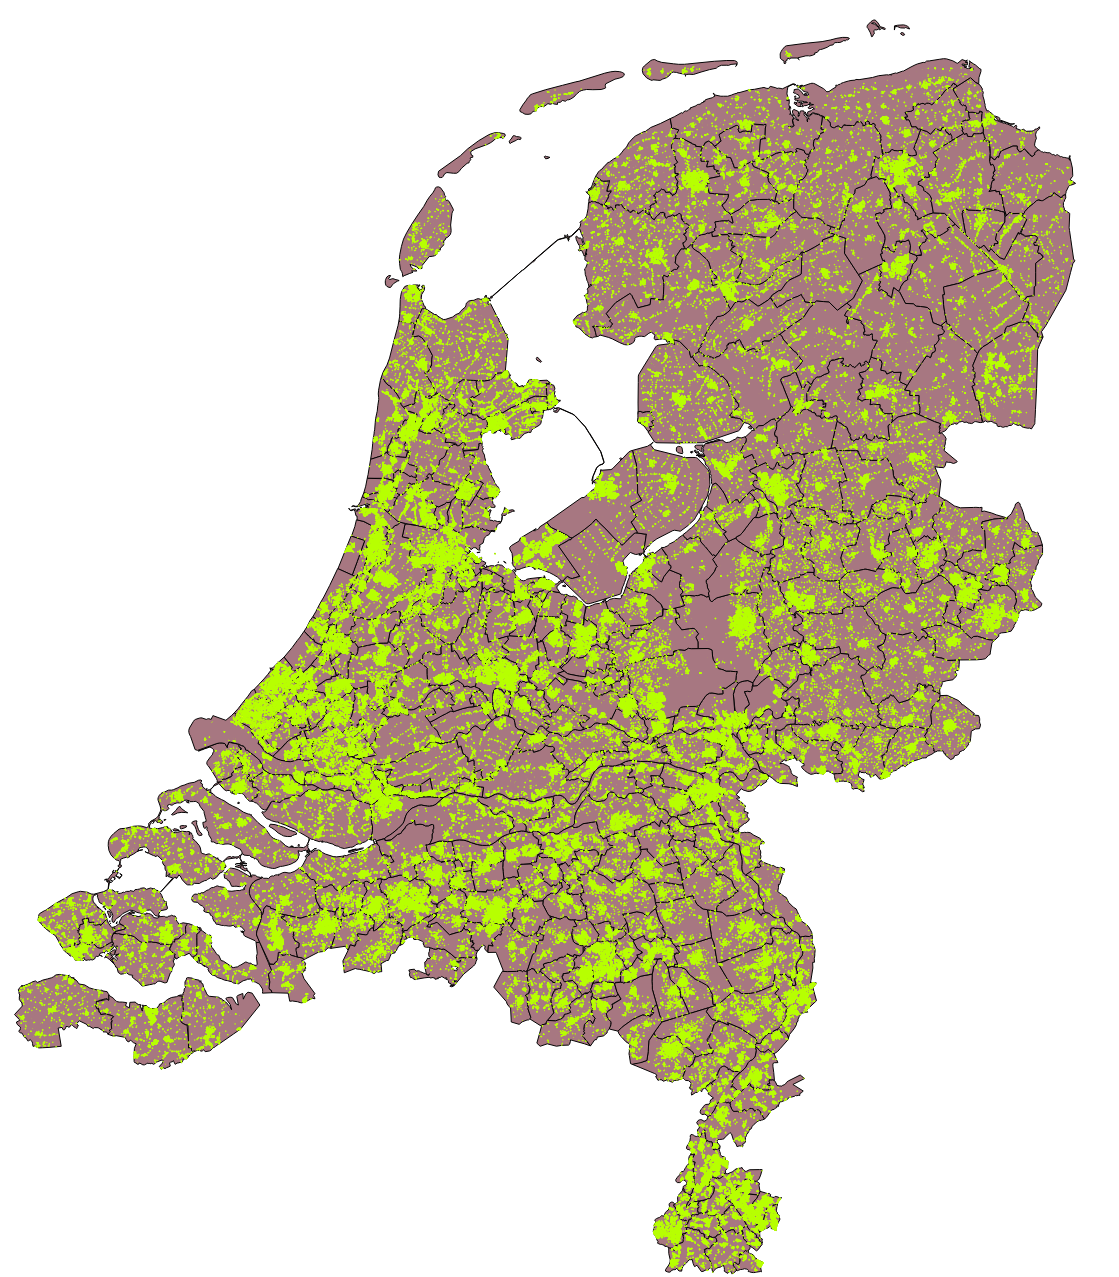 All solar panels within the Netherlands